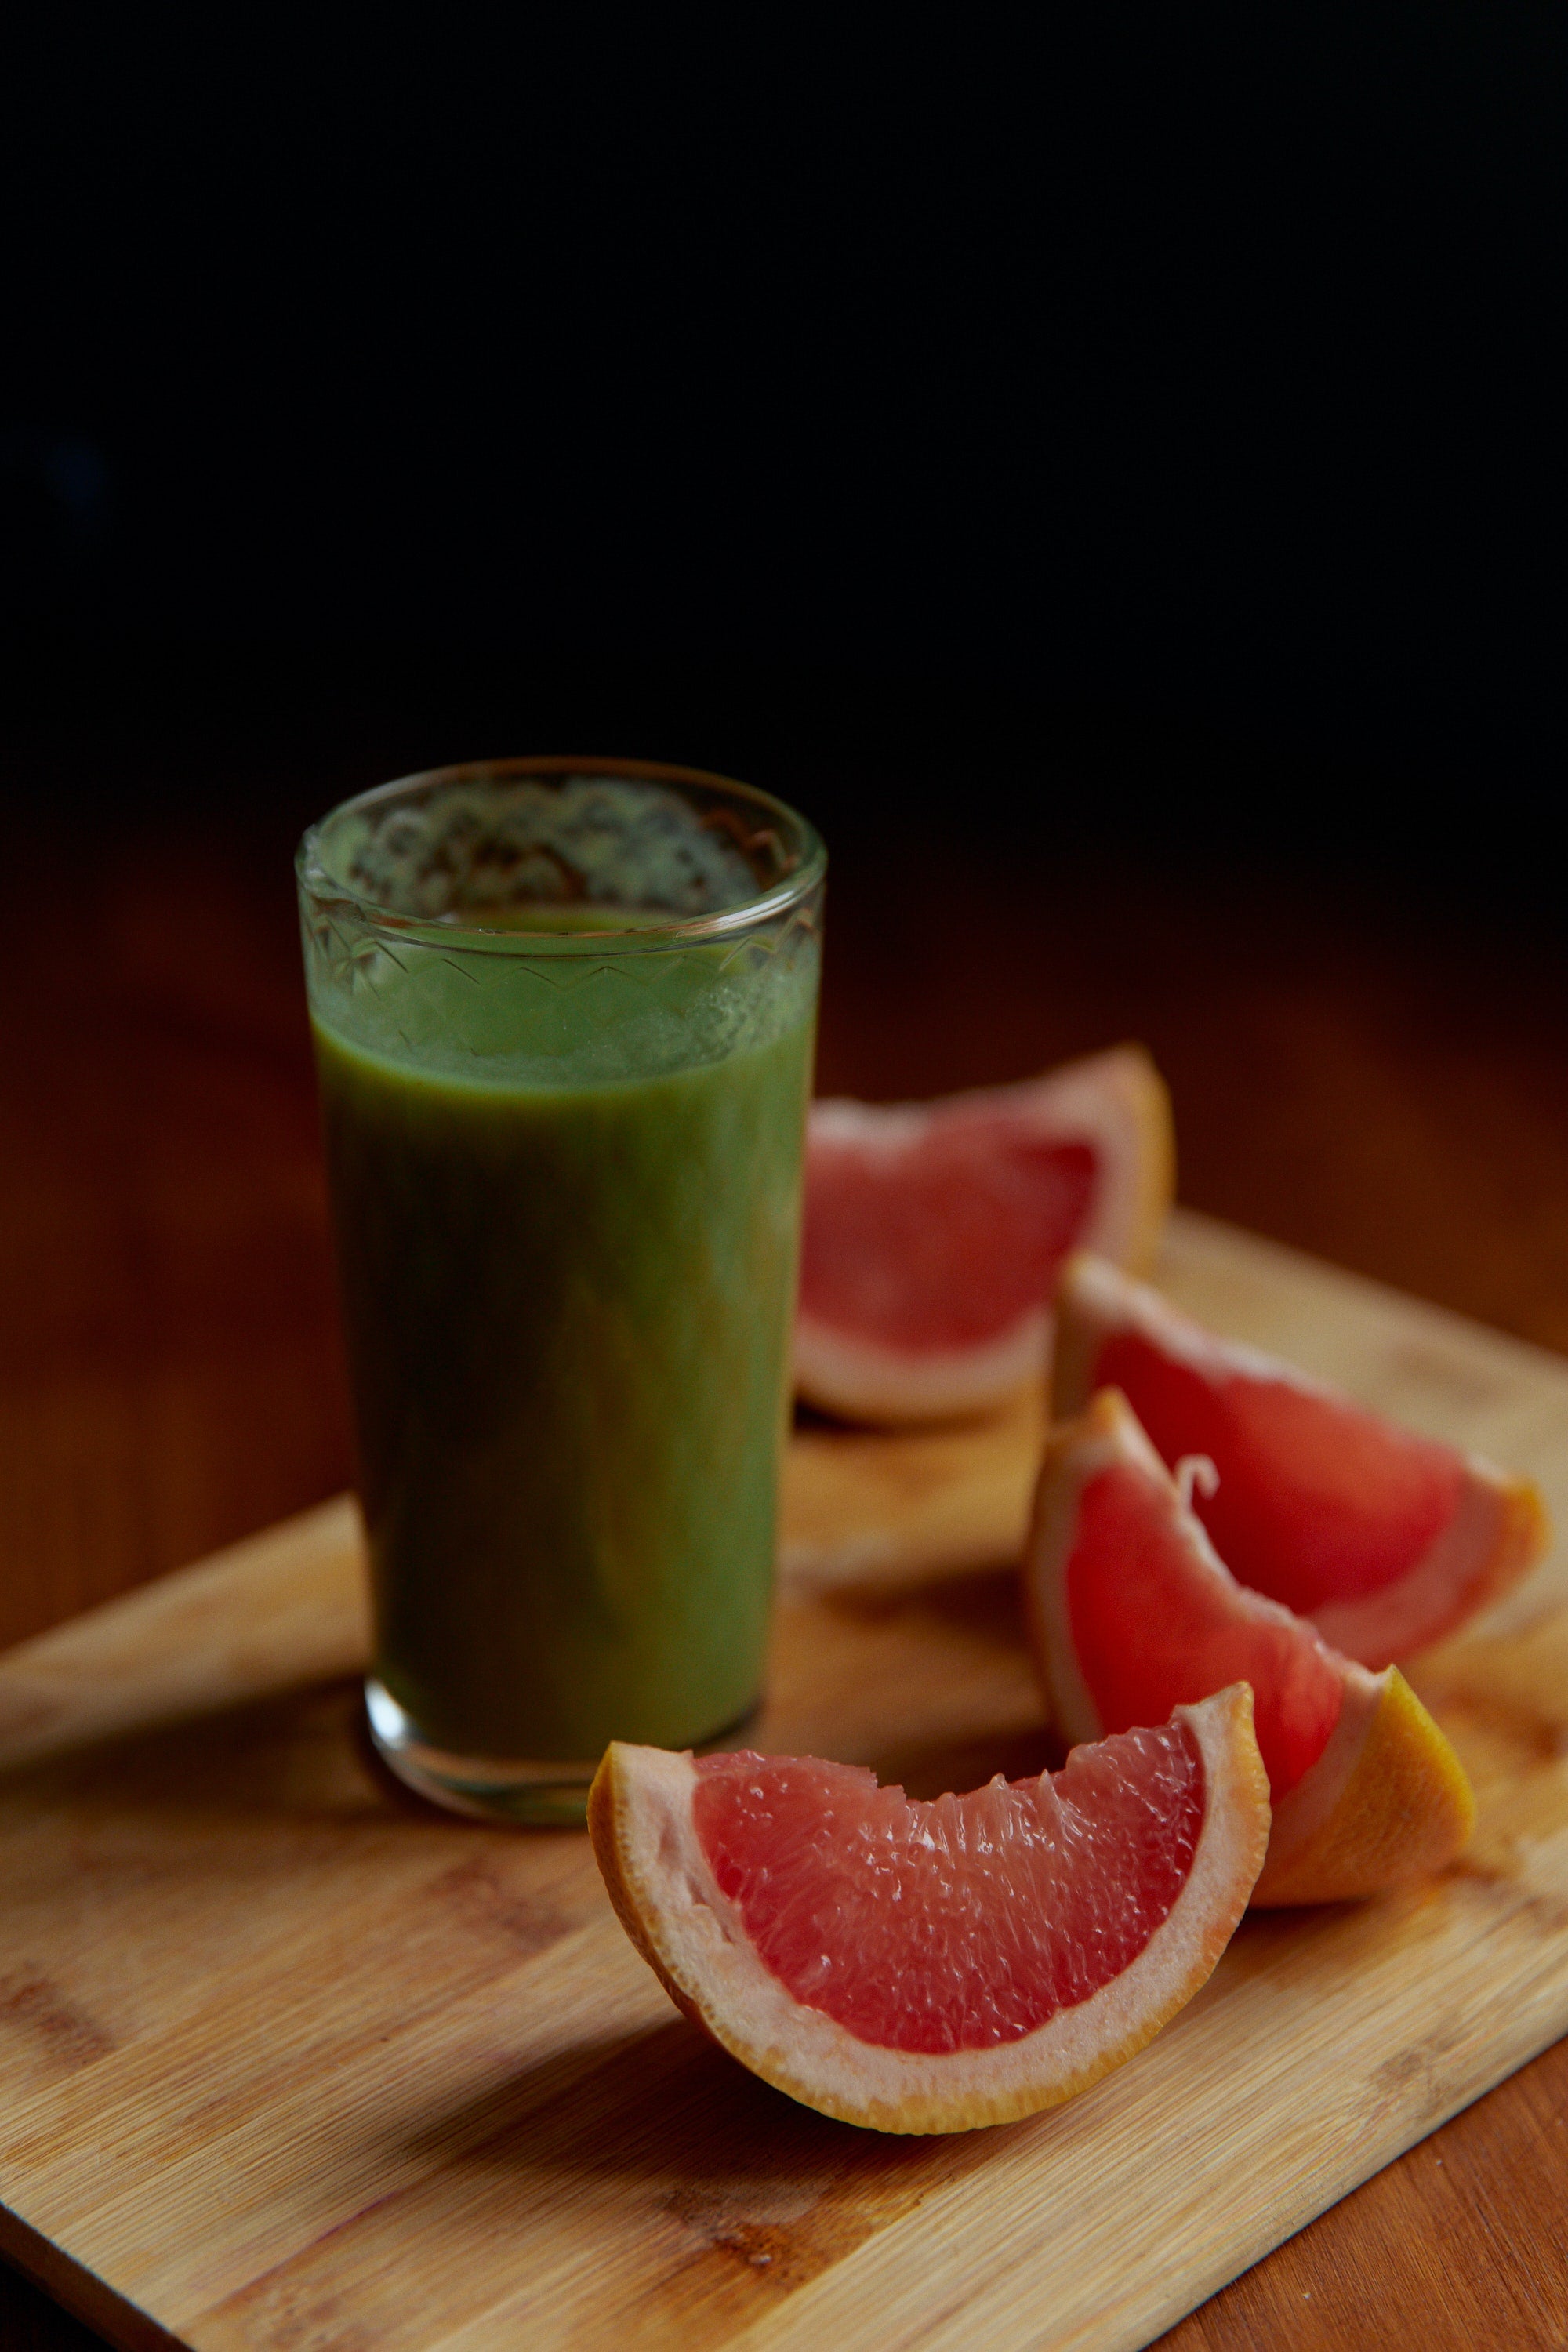 A green smoothie surrounded by grapefruit slices